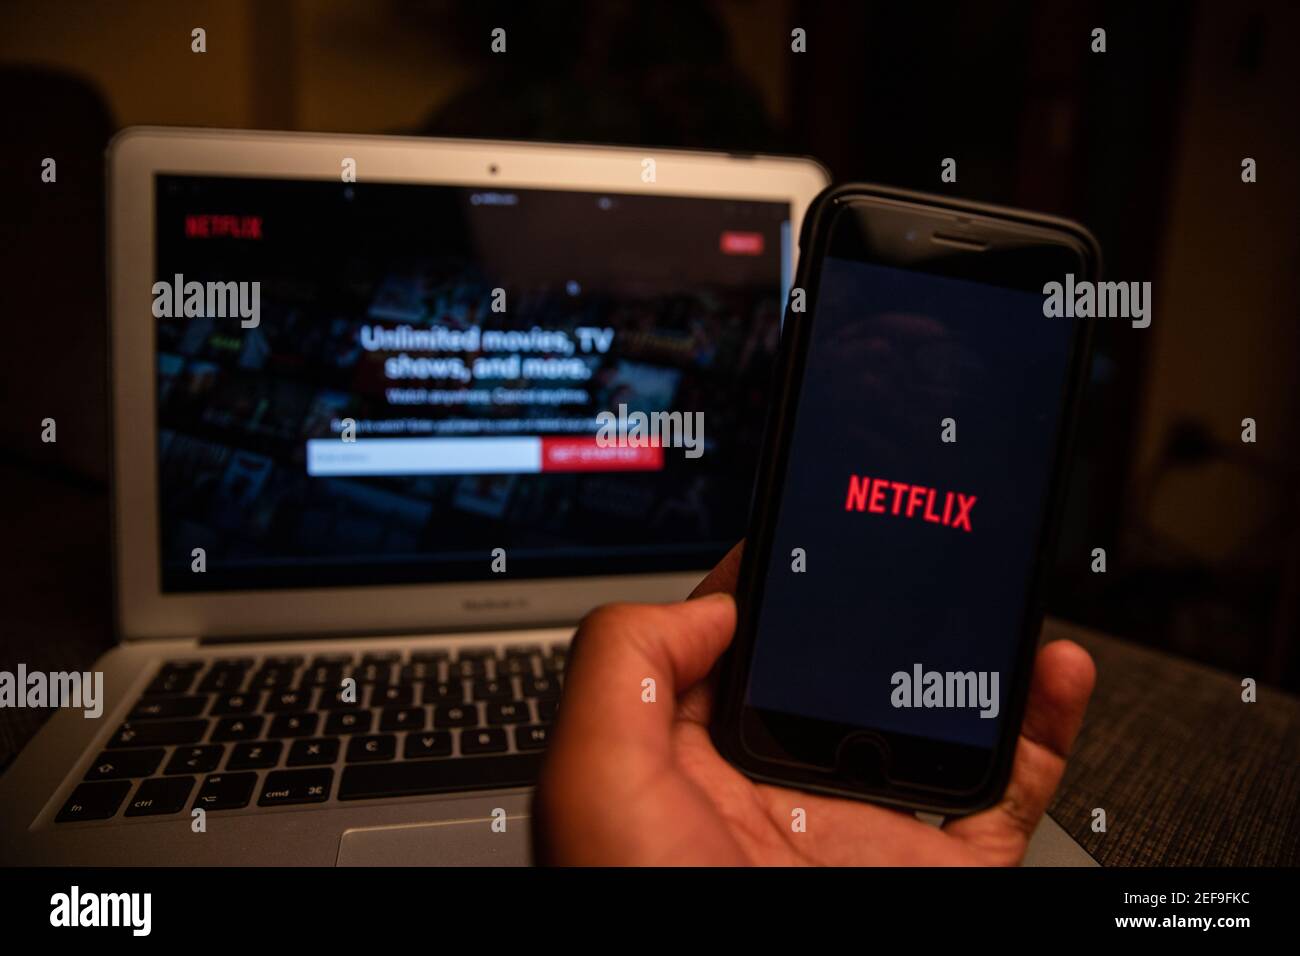 Netflix logo on the screen of a smartphone and a laptop, Netflix is an American subscription streaming service and production company. Stock Photo